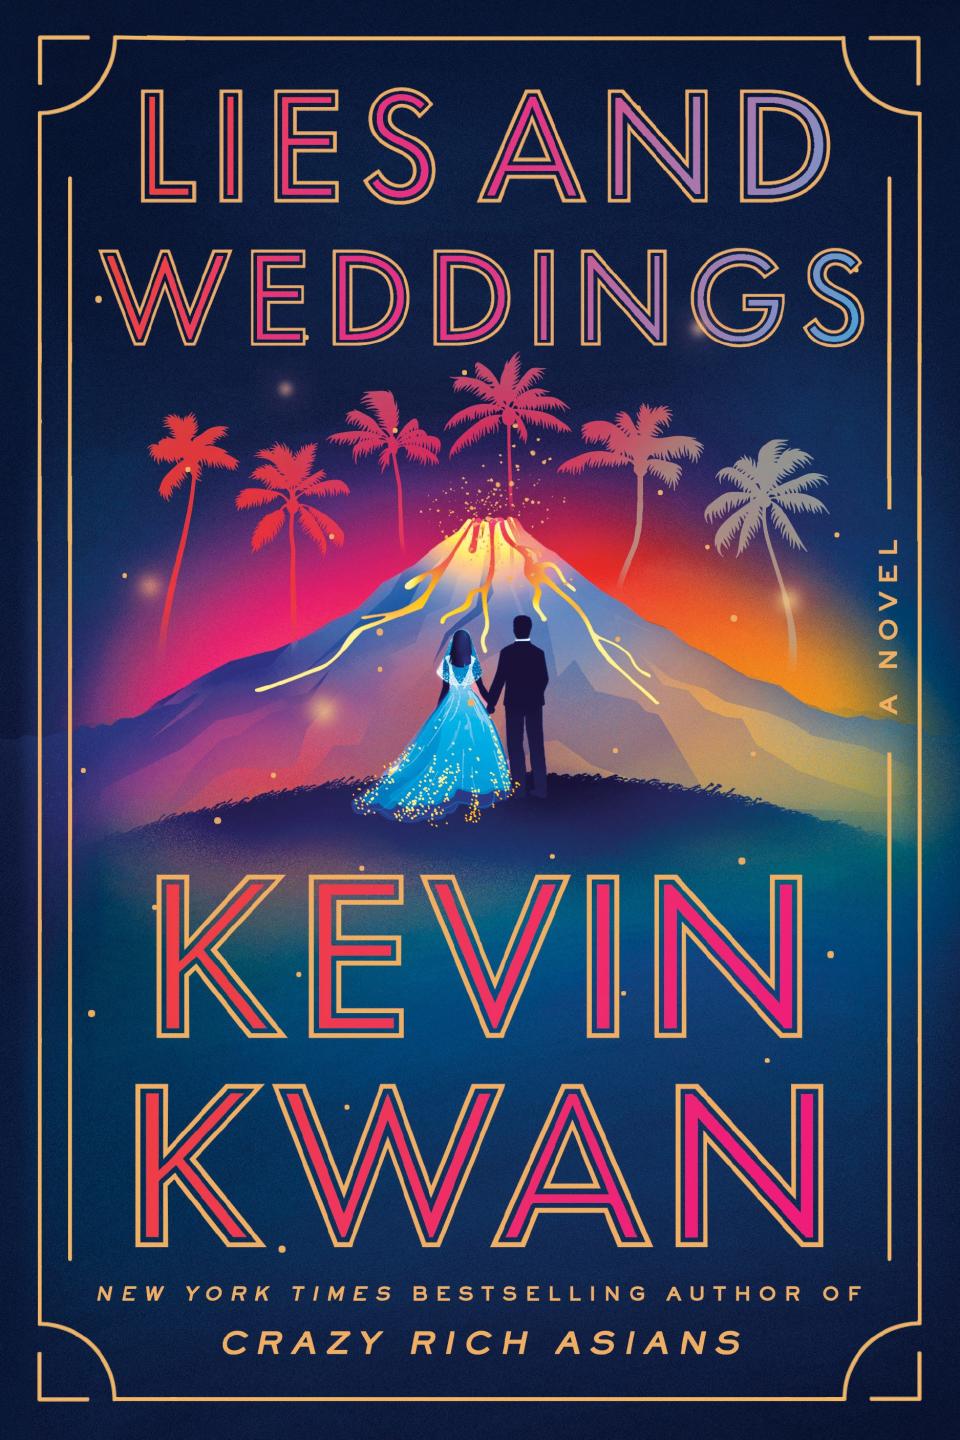 "Lies and Weddings" by Kevin Kwan